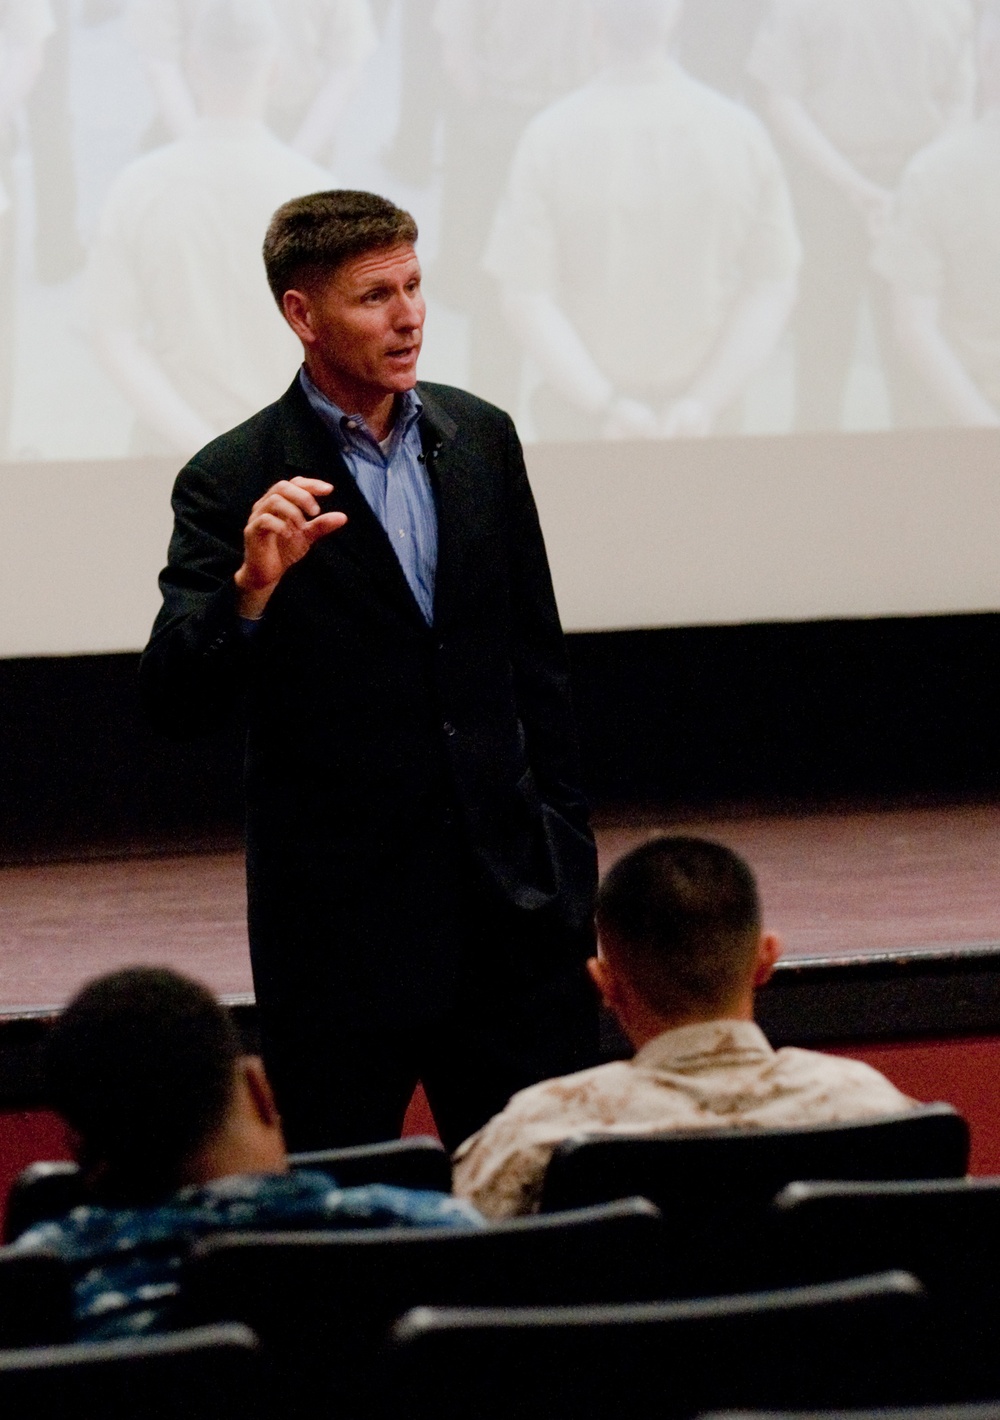 Assistant Secretary of the Navy (Manpower and Reserve Affairs) visits MCB Hawaii